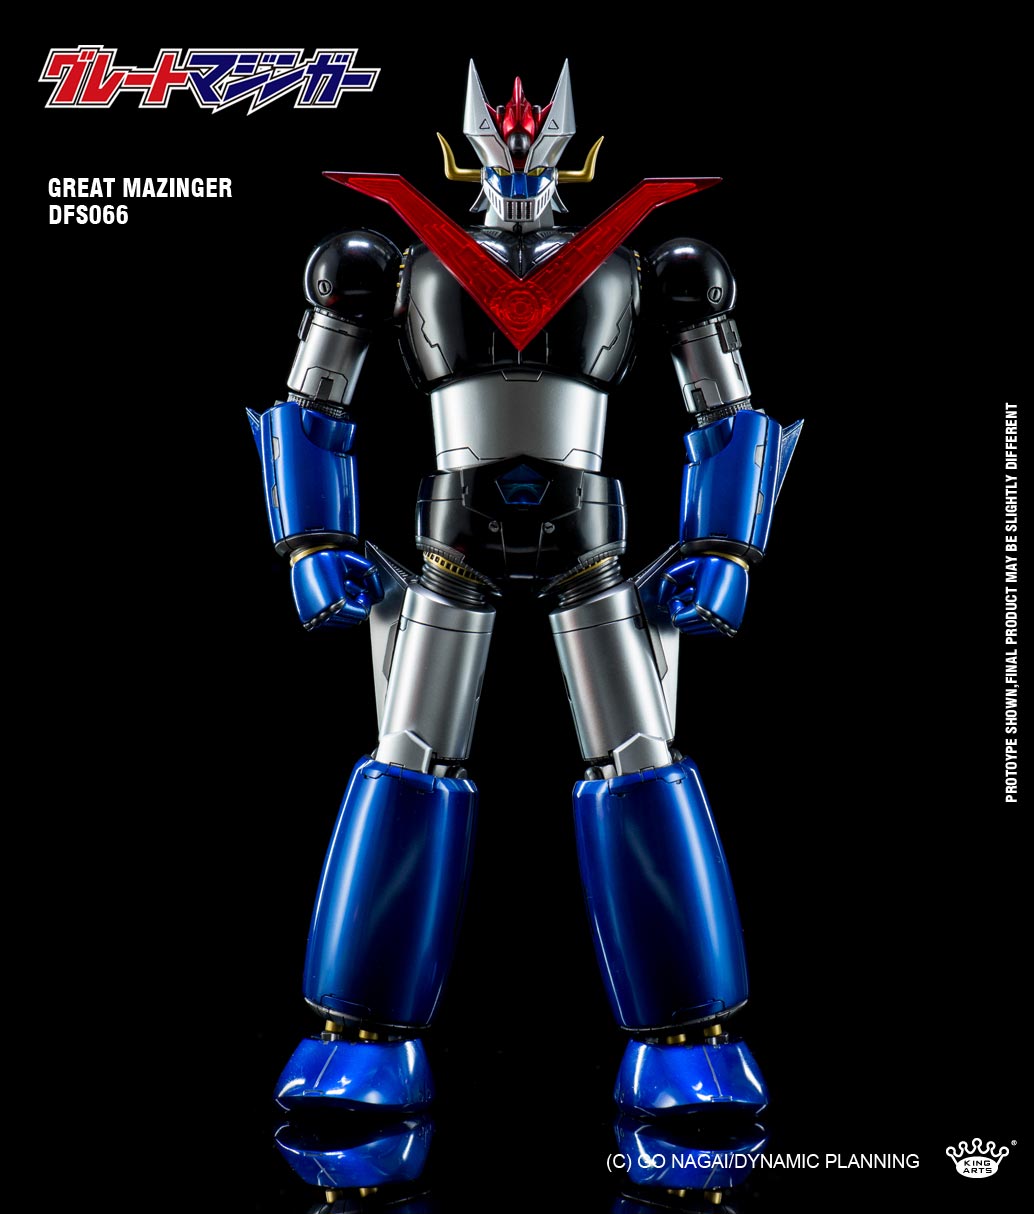 King Arts - DFS066 - Dynamic Planning - Diecast Action Great Mazinger - Marvelous Toys